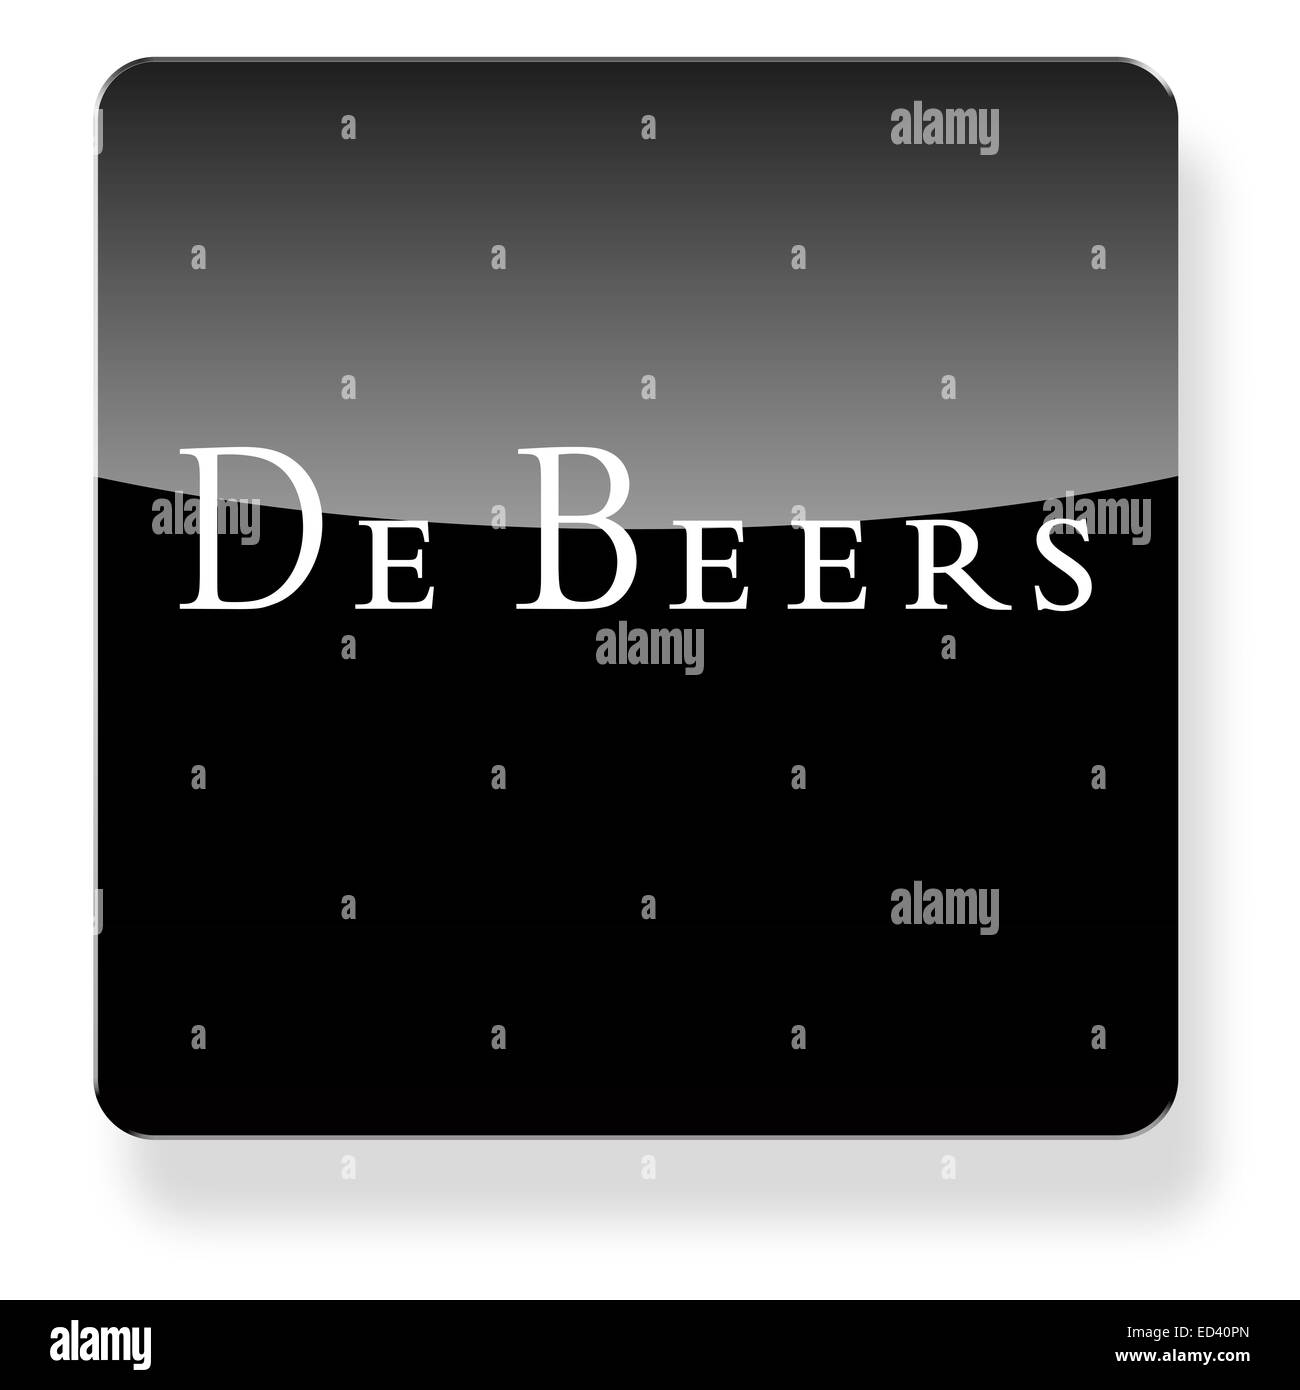 De Beers logo as an app icon. Clipping path included. Stock Photo